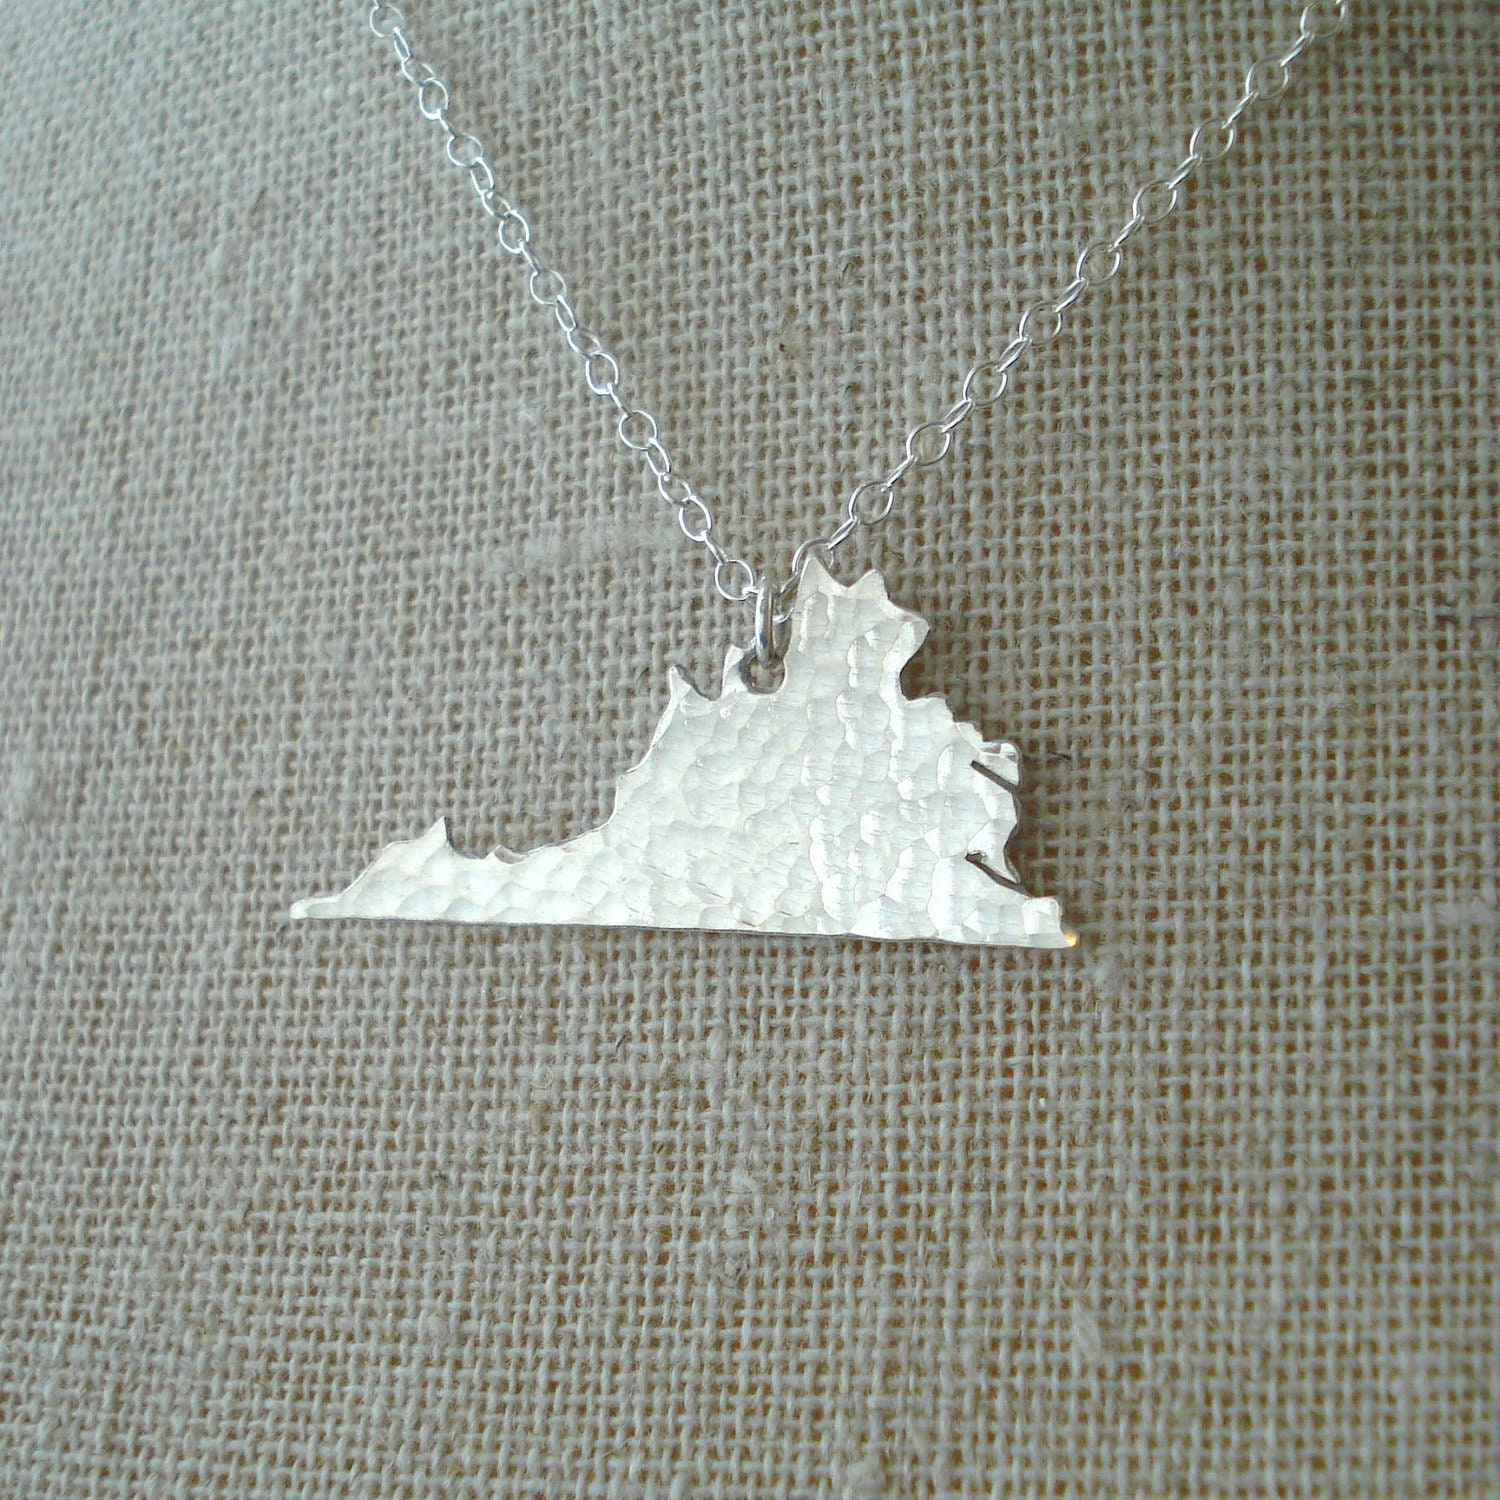 Home State Necklace - Customized